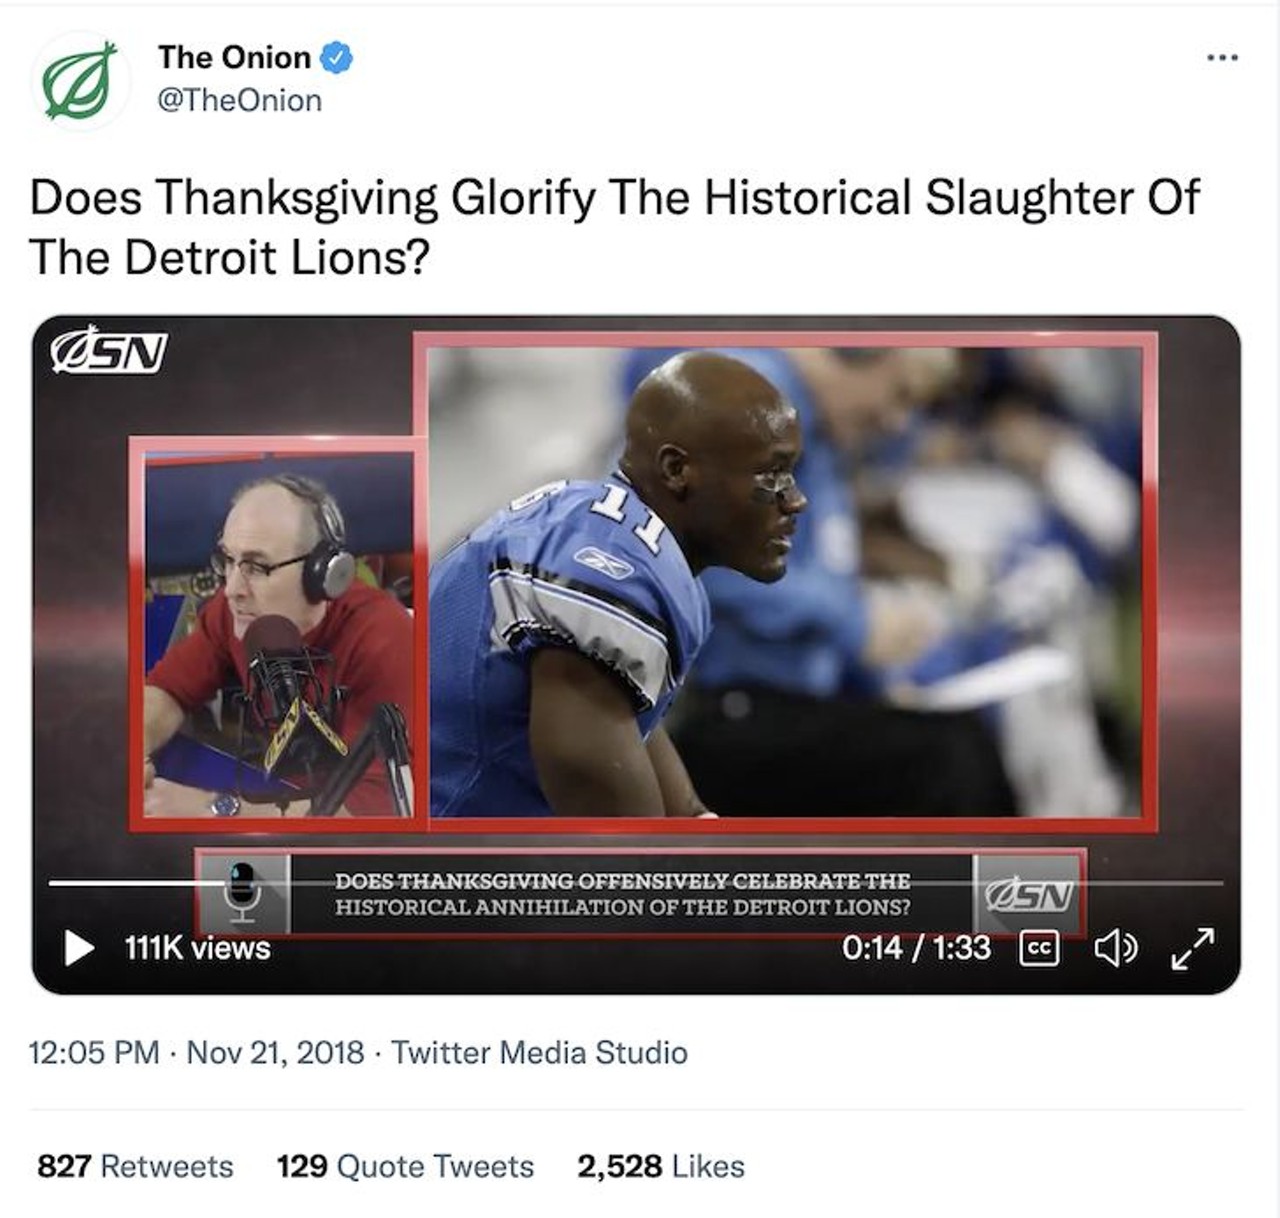 Does Thanksgiving Glorify The Historical Slaughter Of The Detroit Lions?
The Onion hit it on the nose with this one. There&#146;s nothing like a Thanksgiving without sitting around the TV watching the Lions get absolutely demolished. What&#146;s sad is that we still think they&#146;ll win each year.